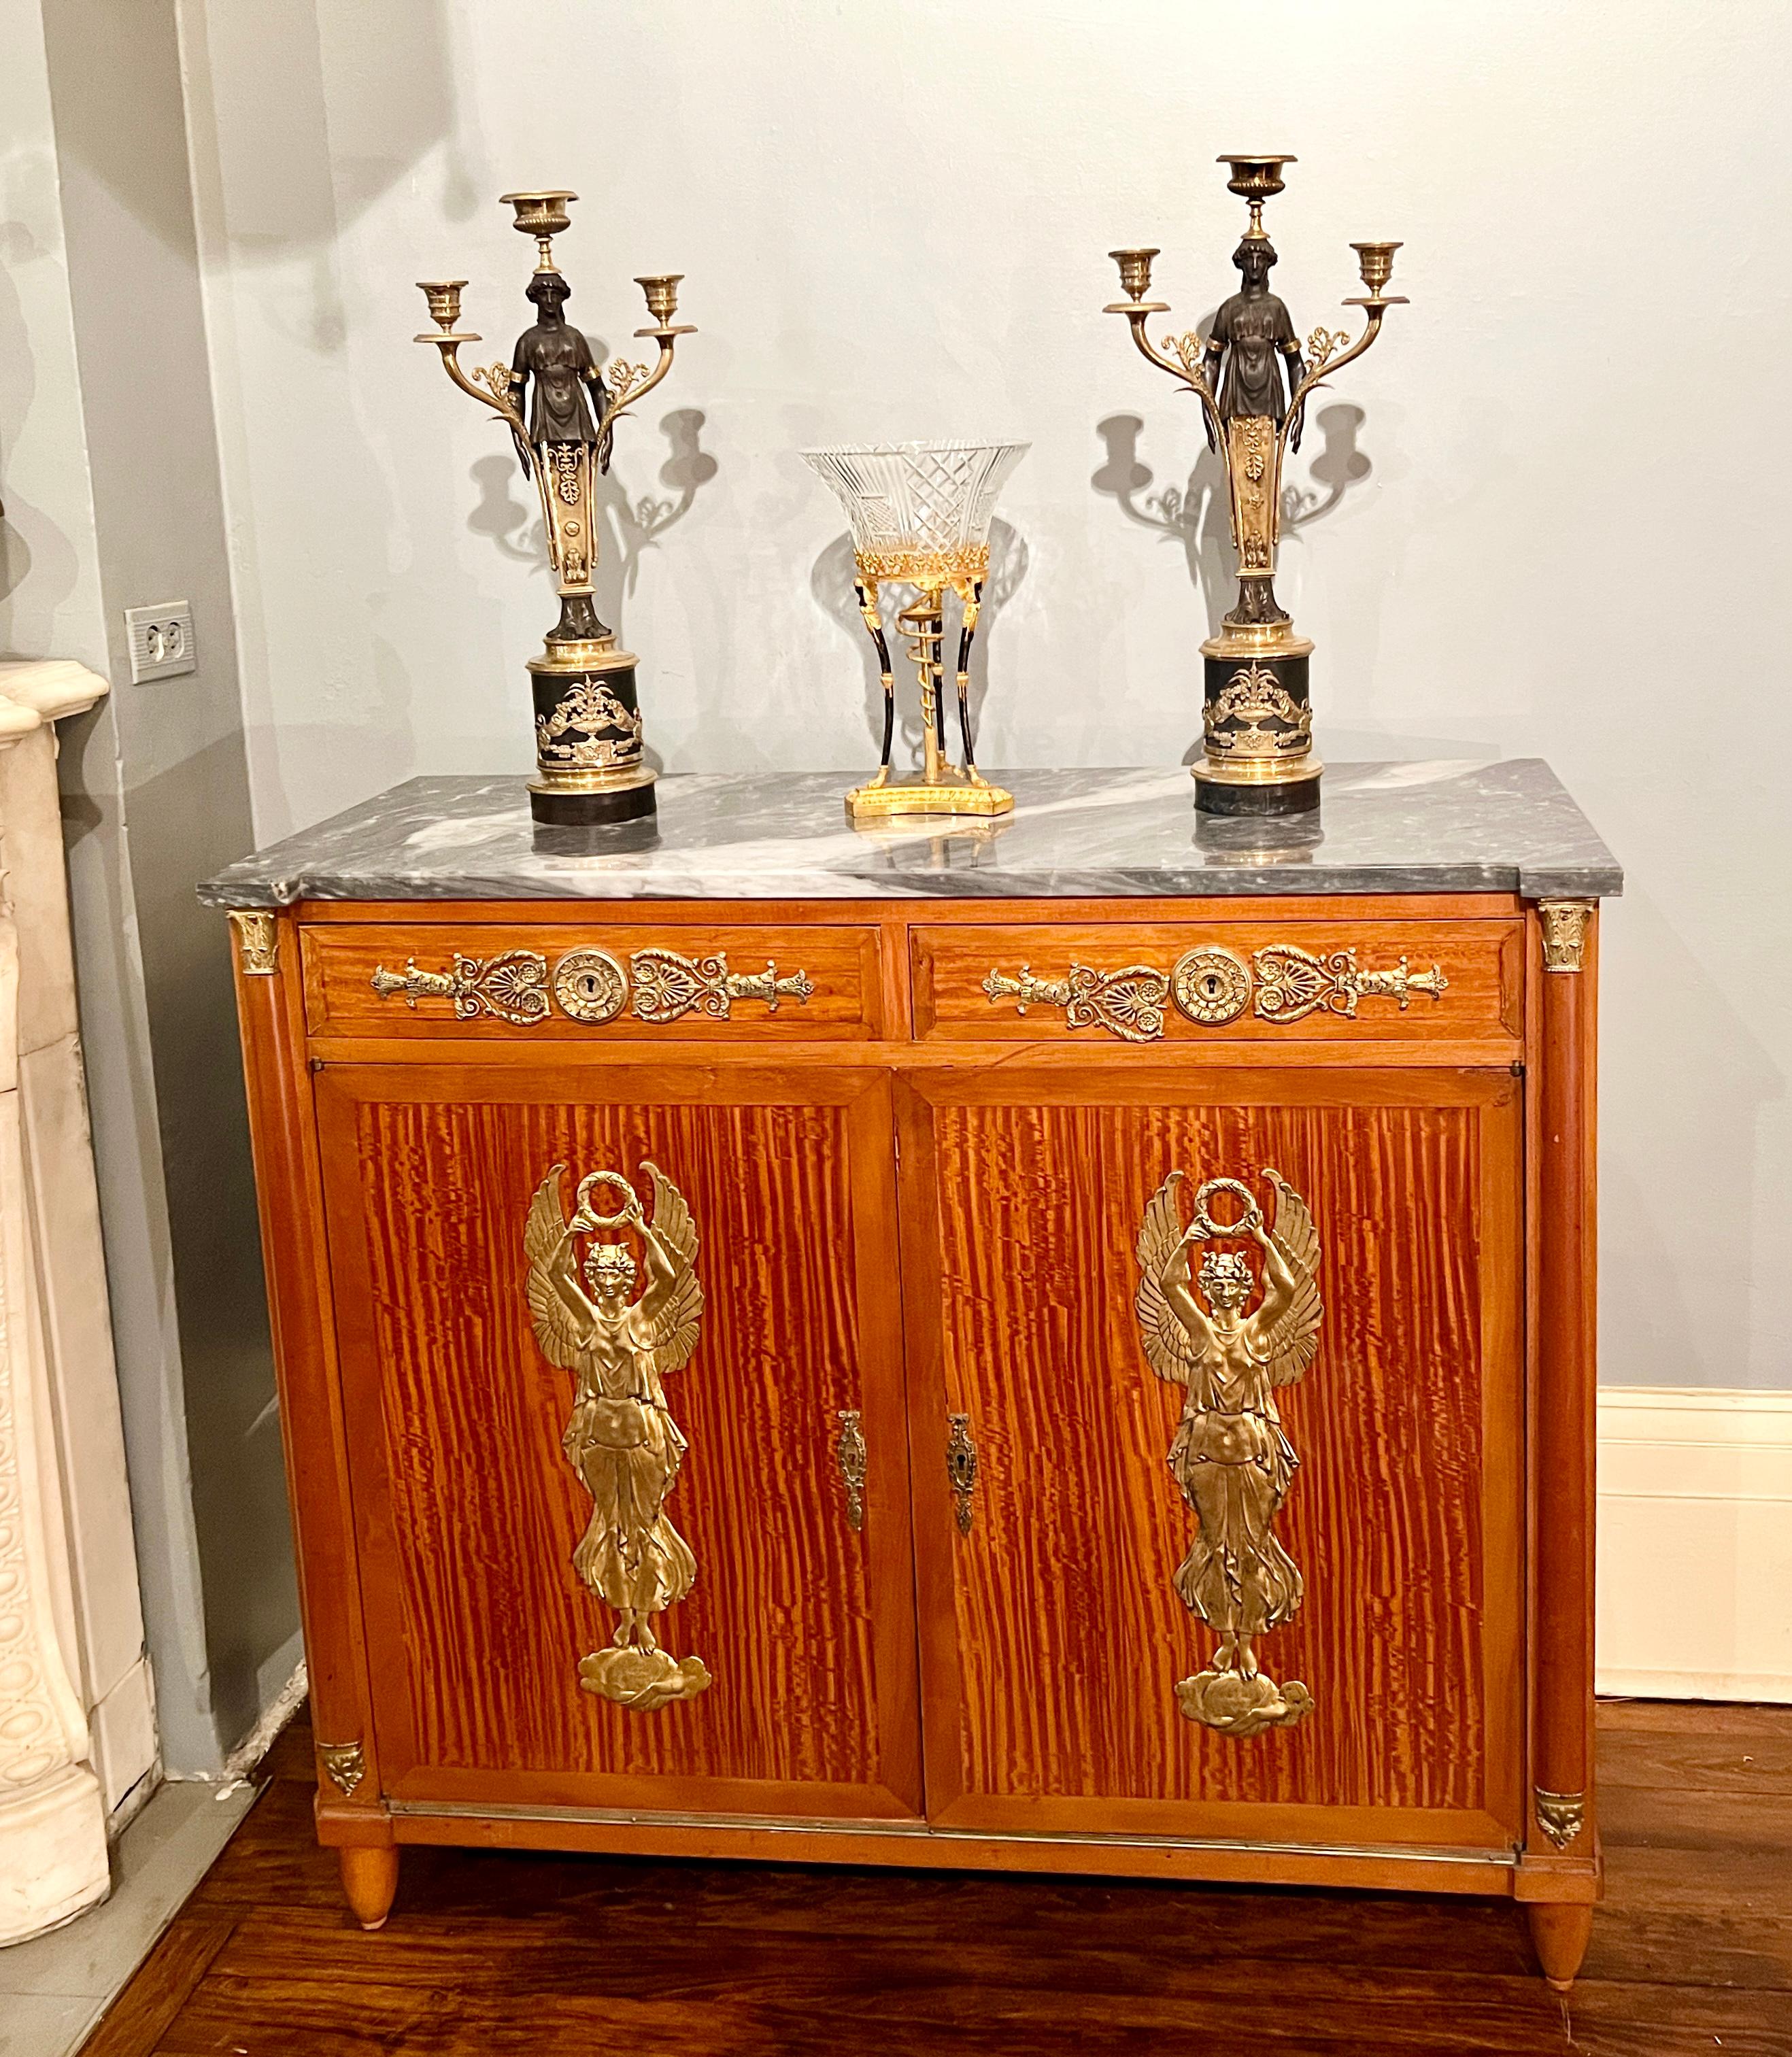 Antique French Empire Ormolu Mounted Marble Top Satinwood Cabinet, Circa 1890. For Sale 1